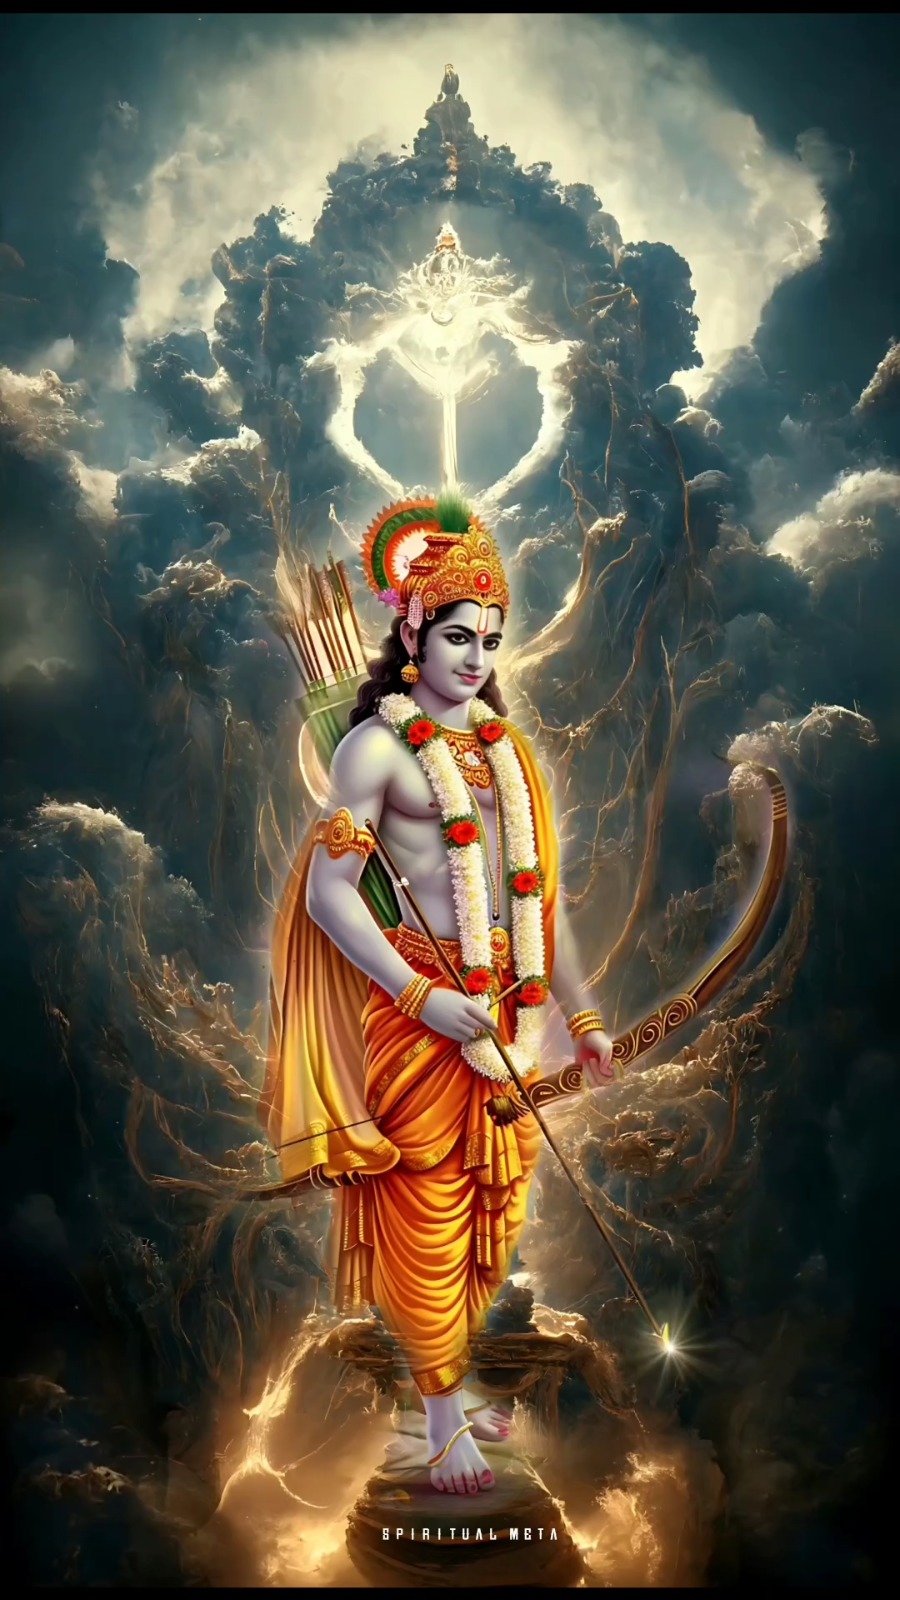 Lord Ram is an embodiment of Dharma